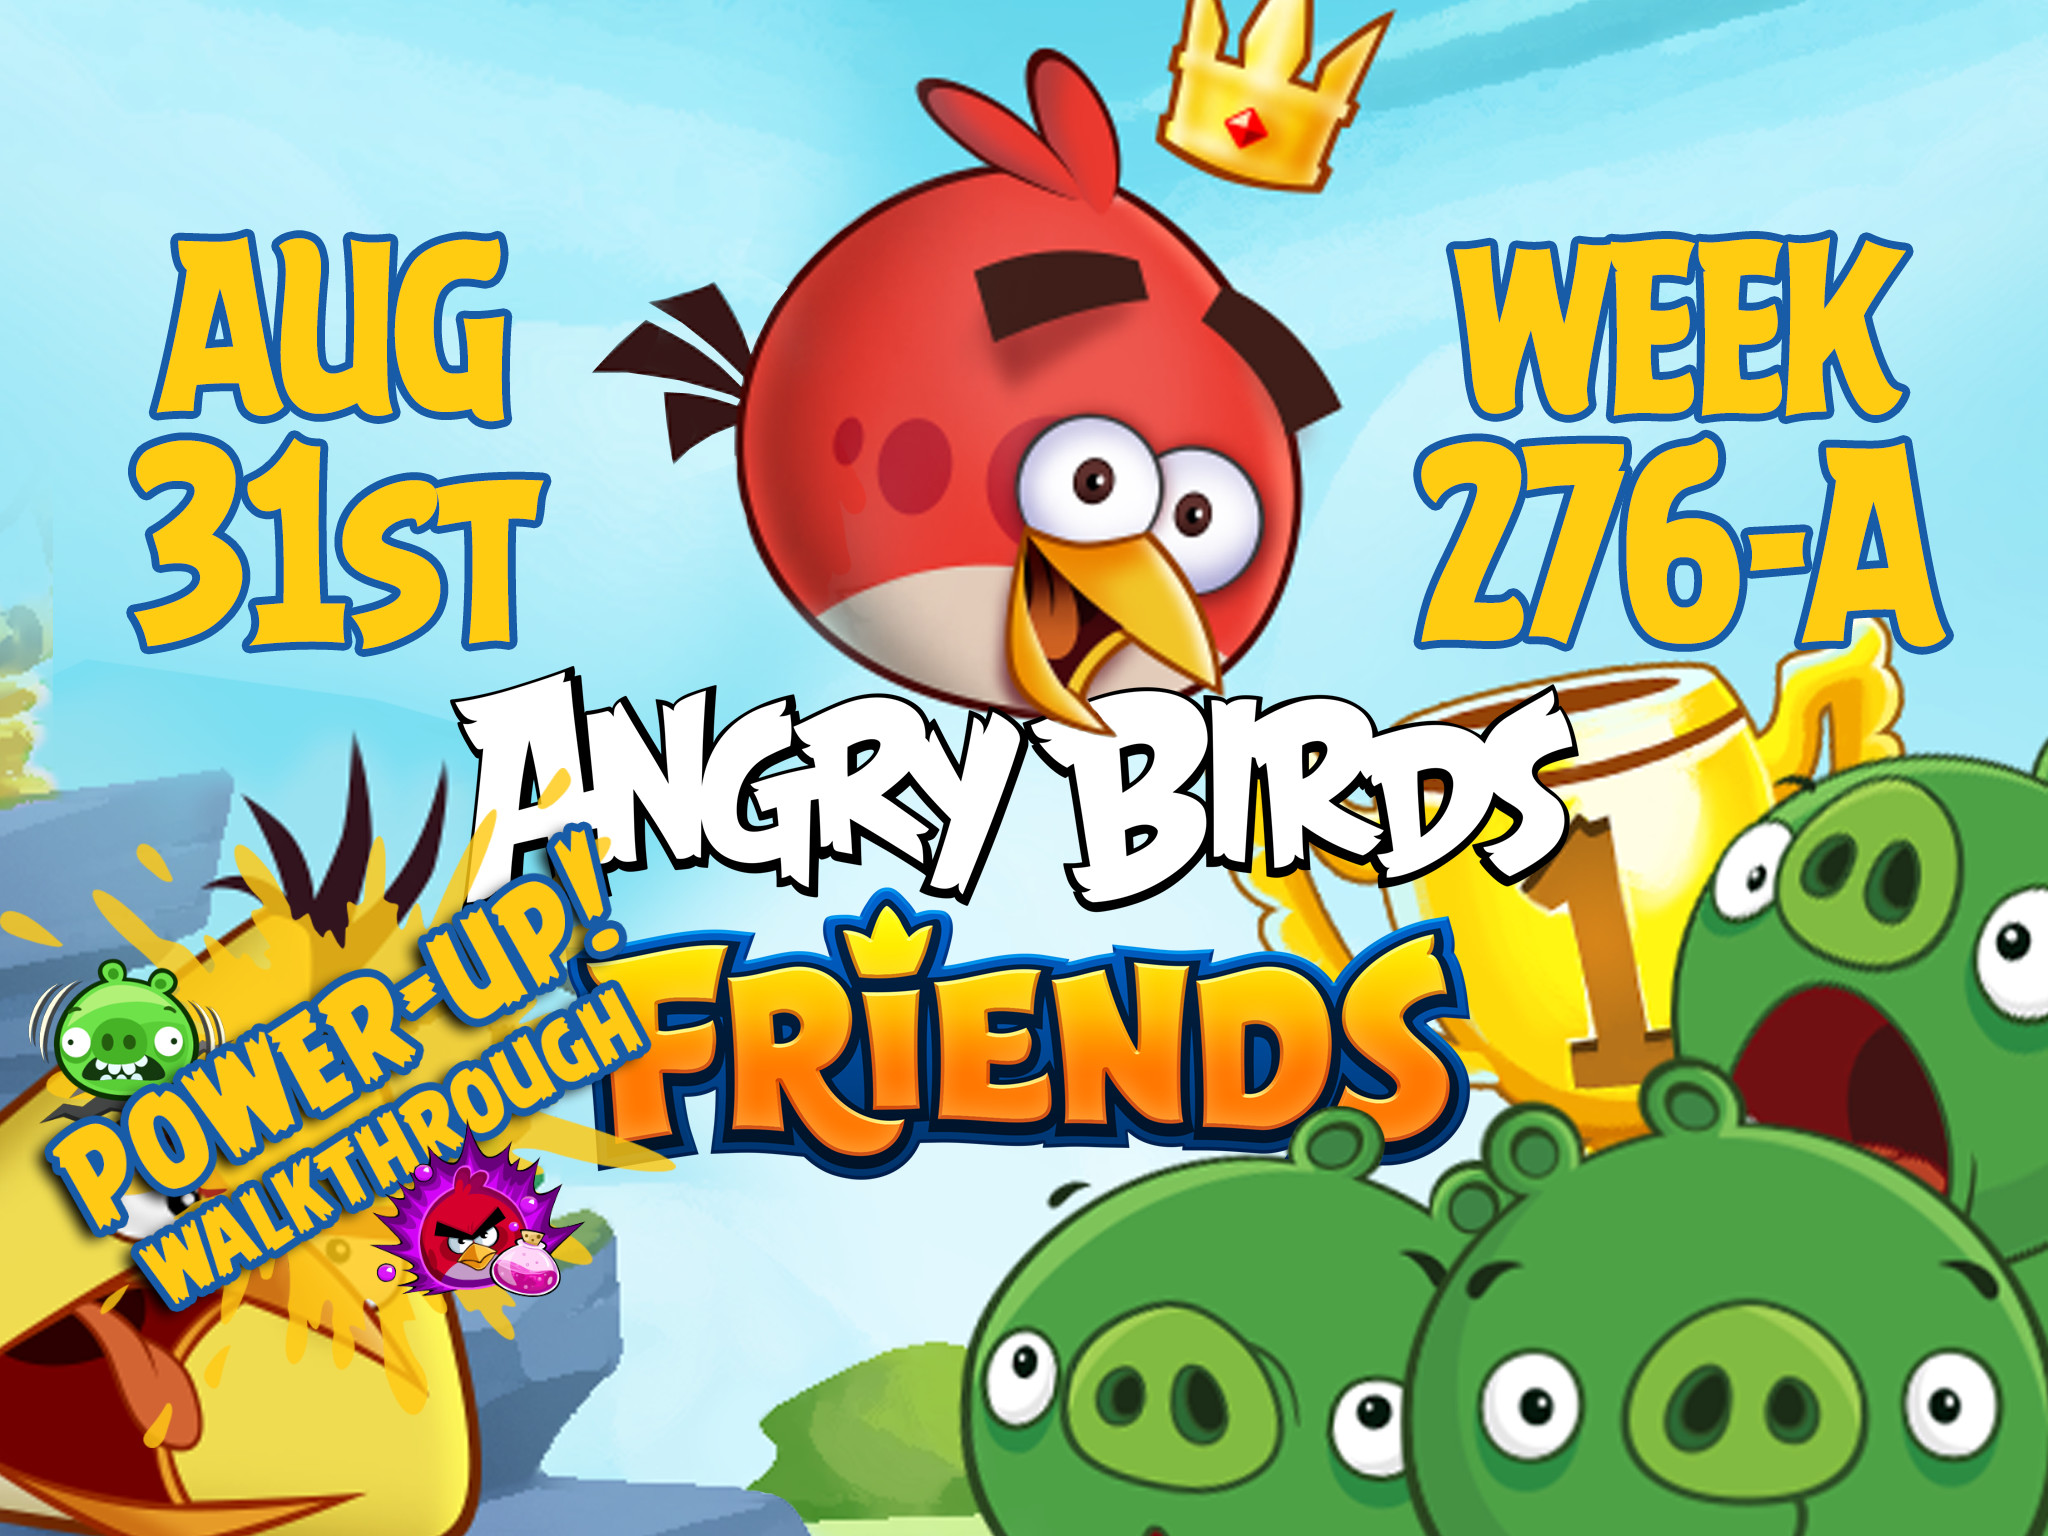 Angry Birds Friends Tournament Week 276-A Feature Image PU